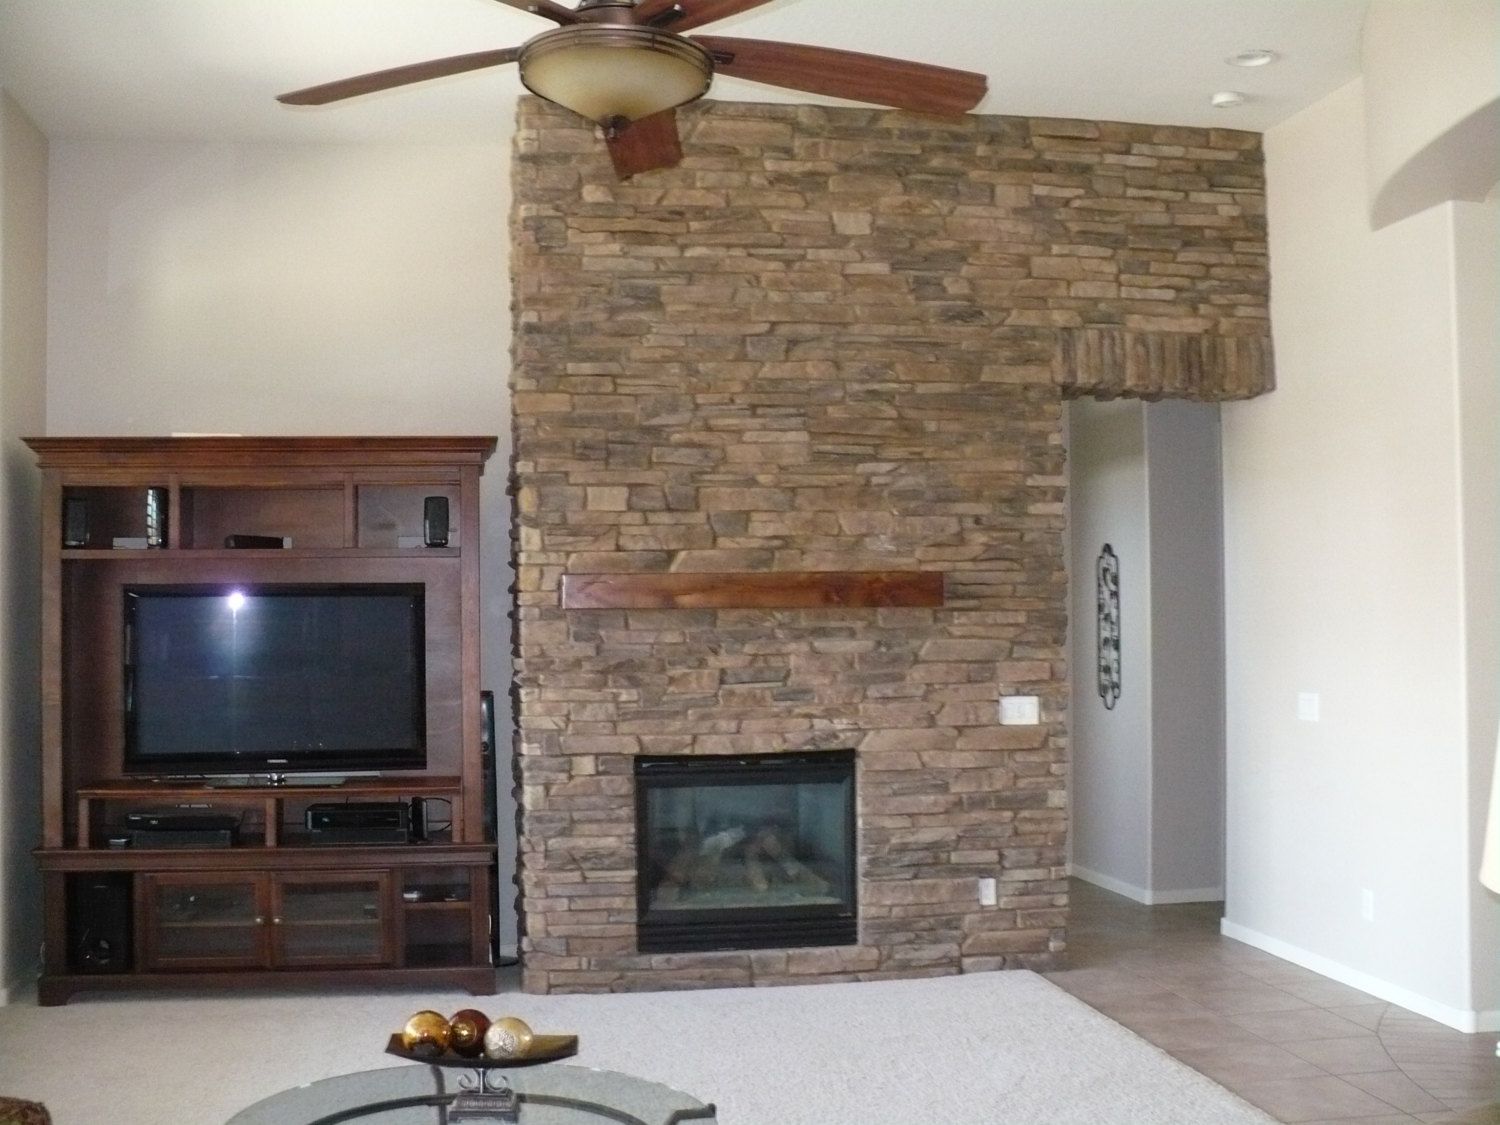 How to Install A Fireplace Mantel Shelf Inspirational New Mantel Install for A Client In Gilbert Az by